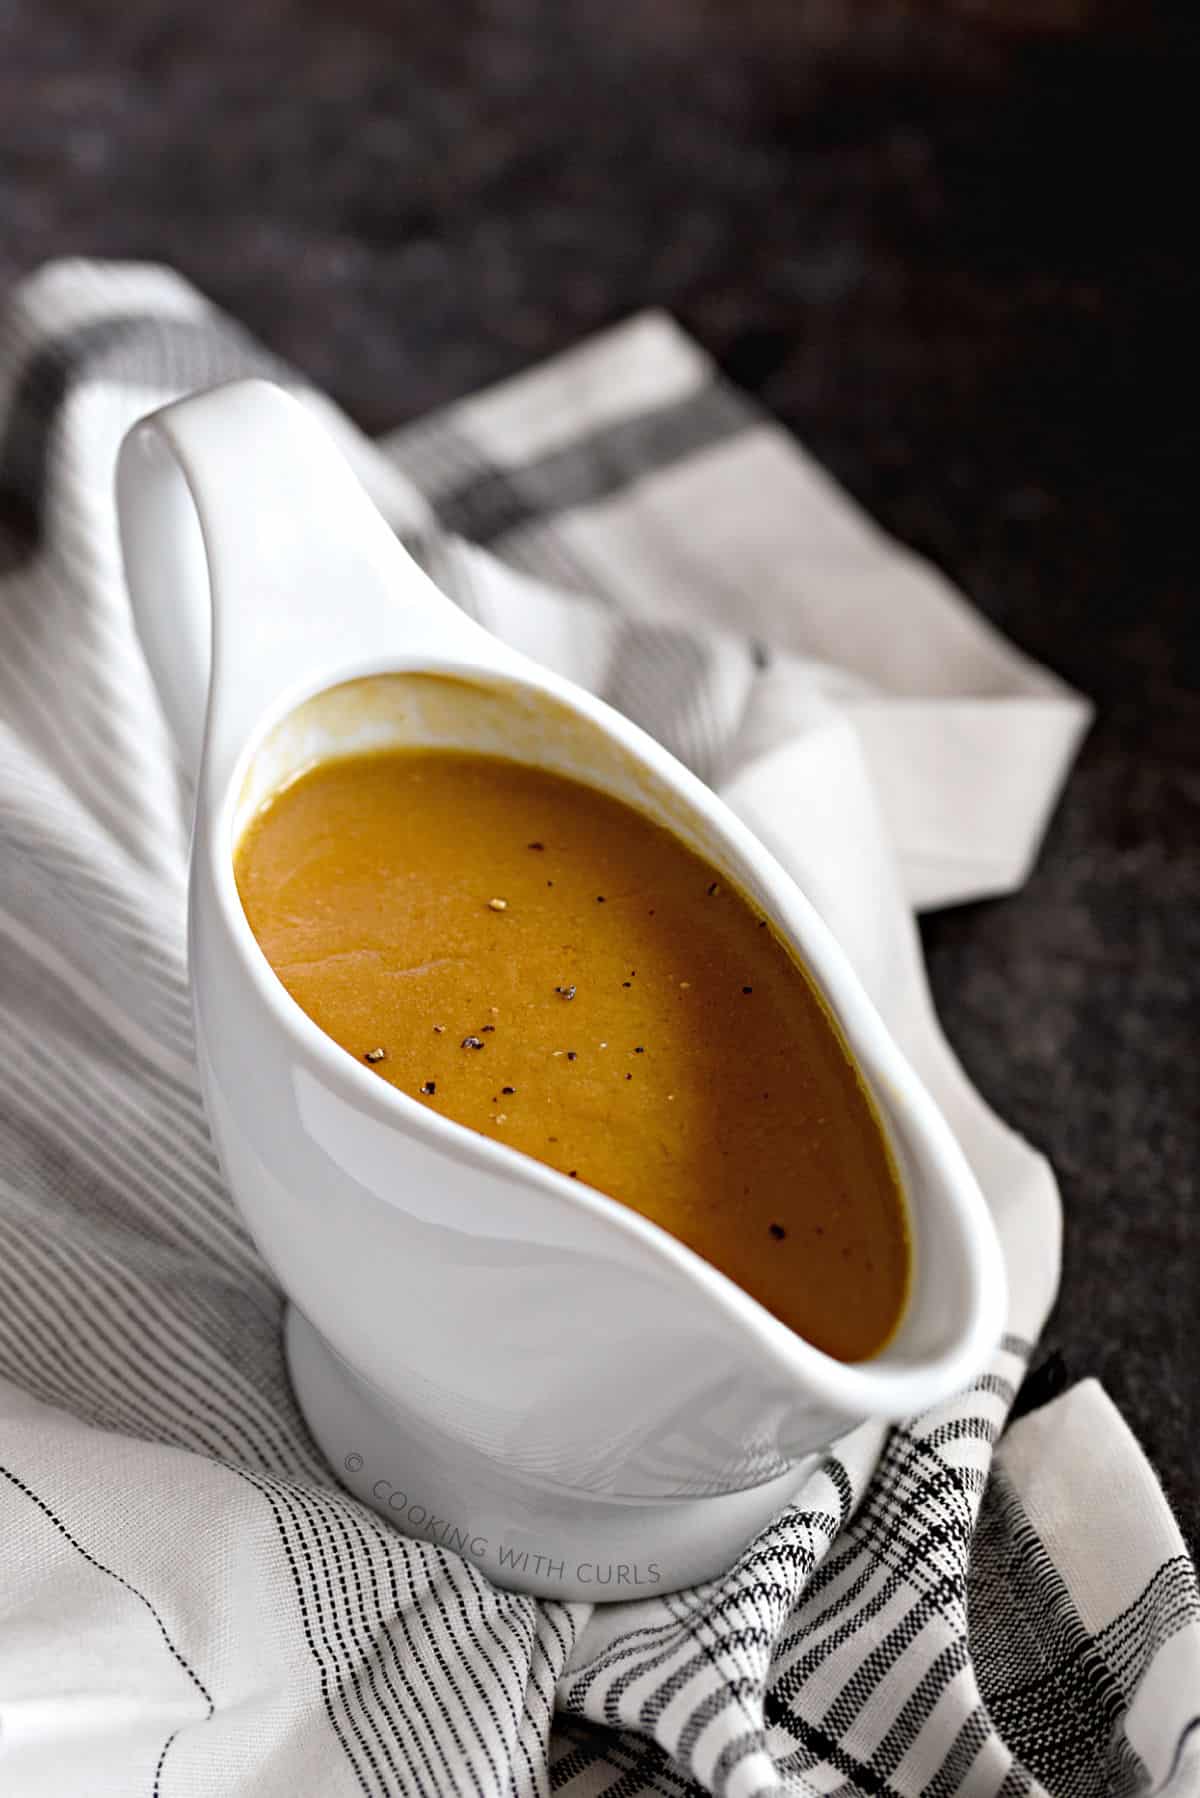 Rich, brown turkey gravy sprinkled with black pepper in a white gravy boat sitting on a black and white striped napkin.